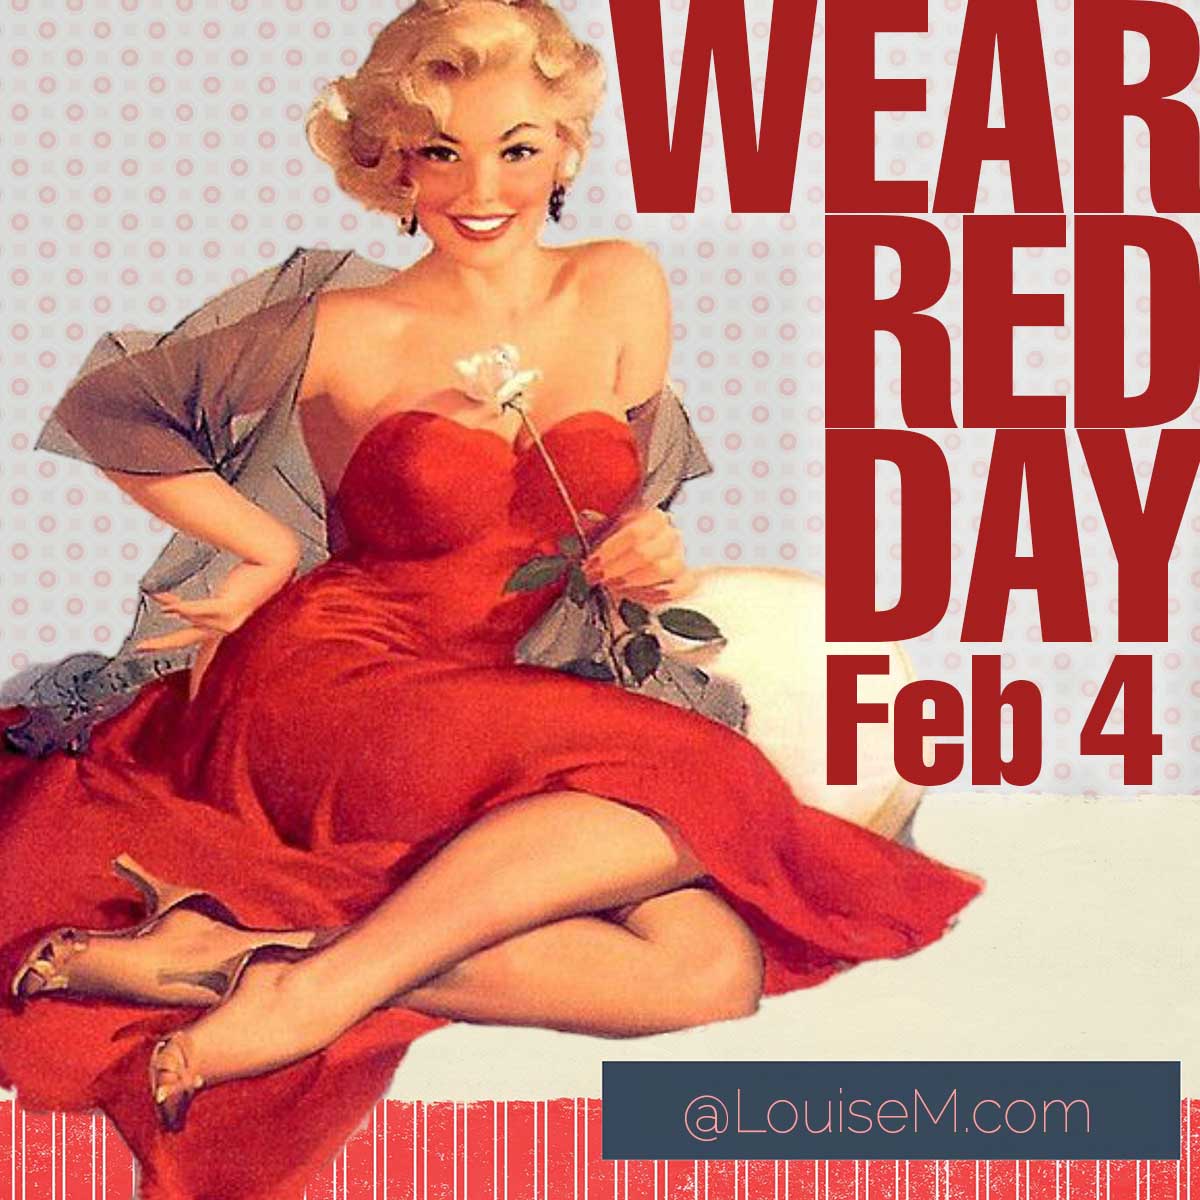 retro art of lady in red dress with words wear red day february 4.